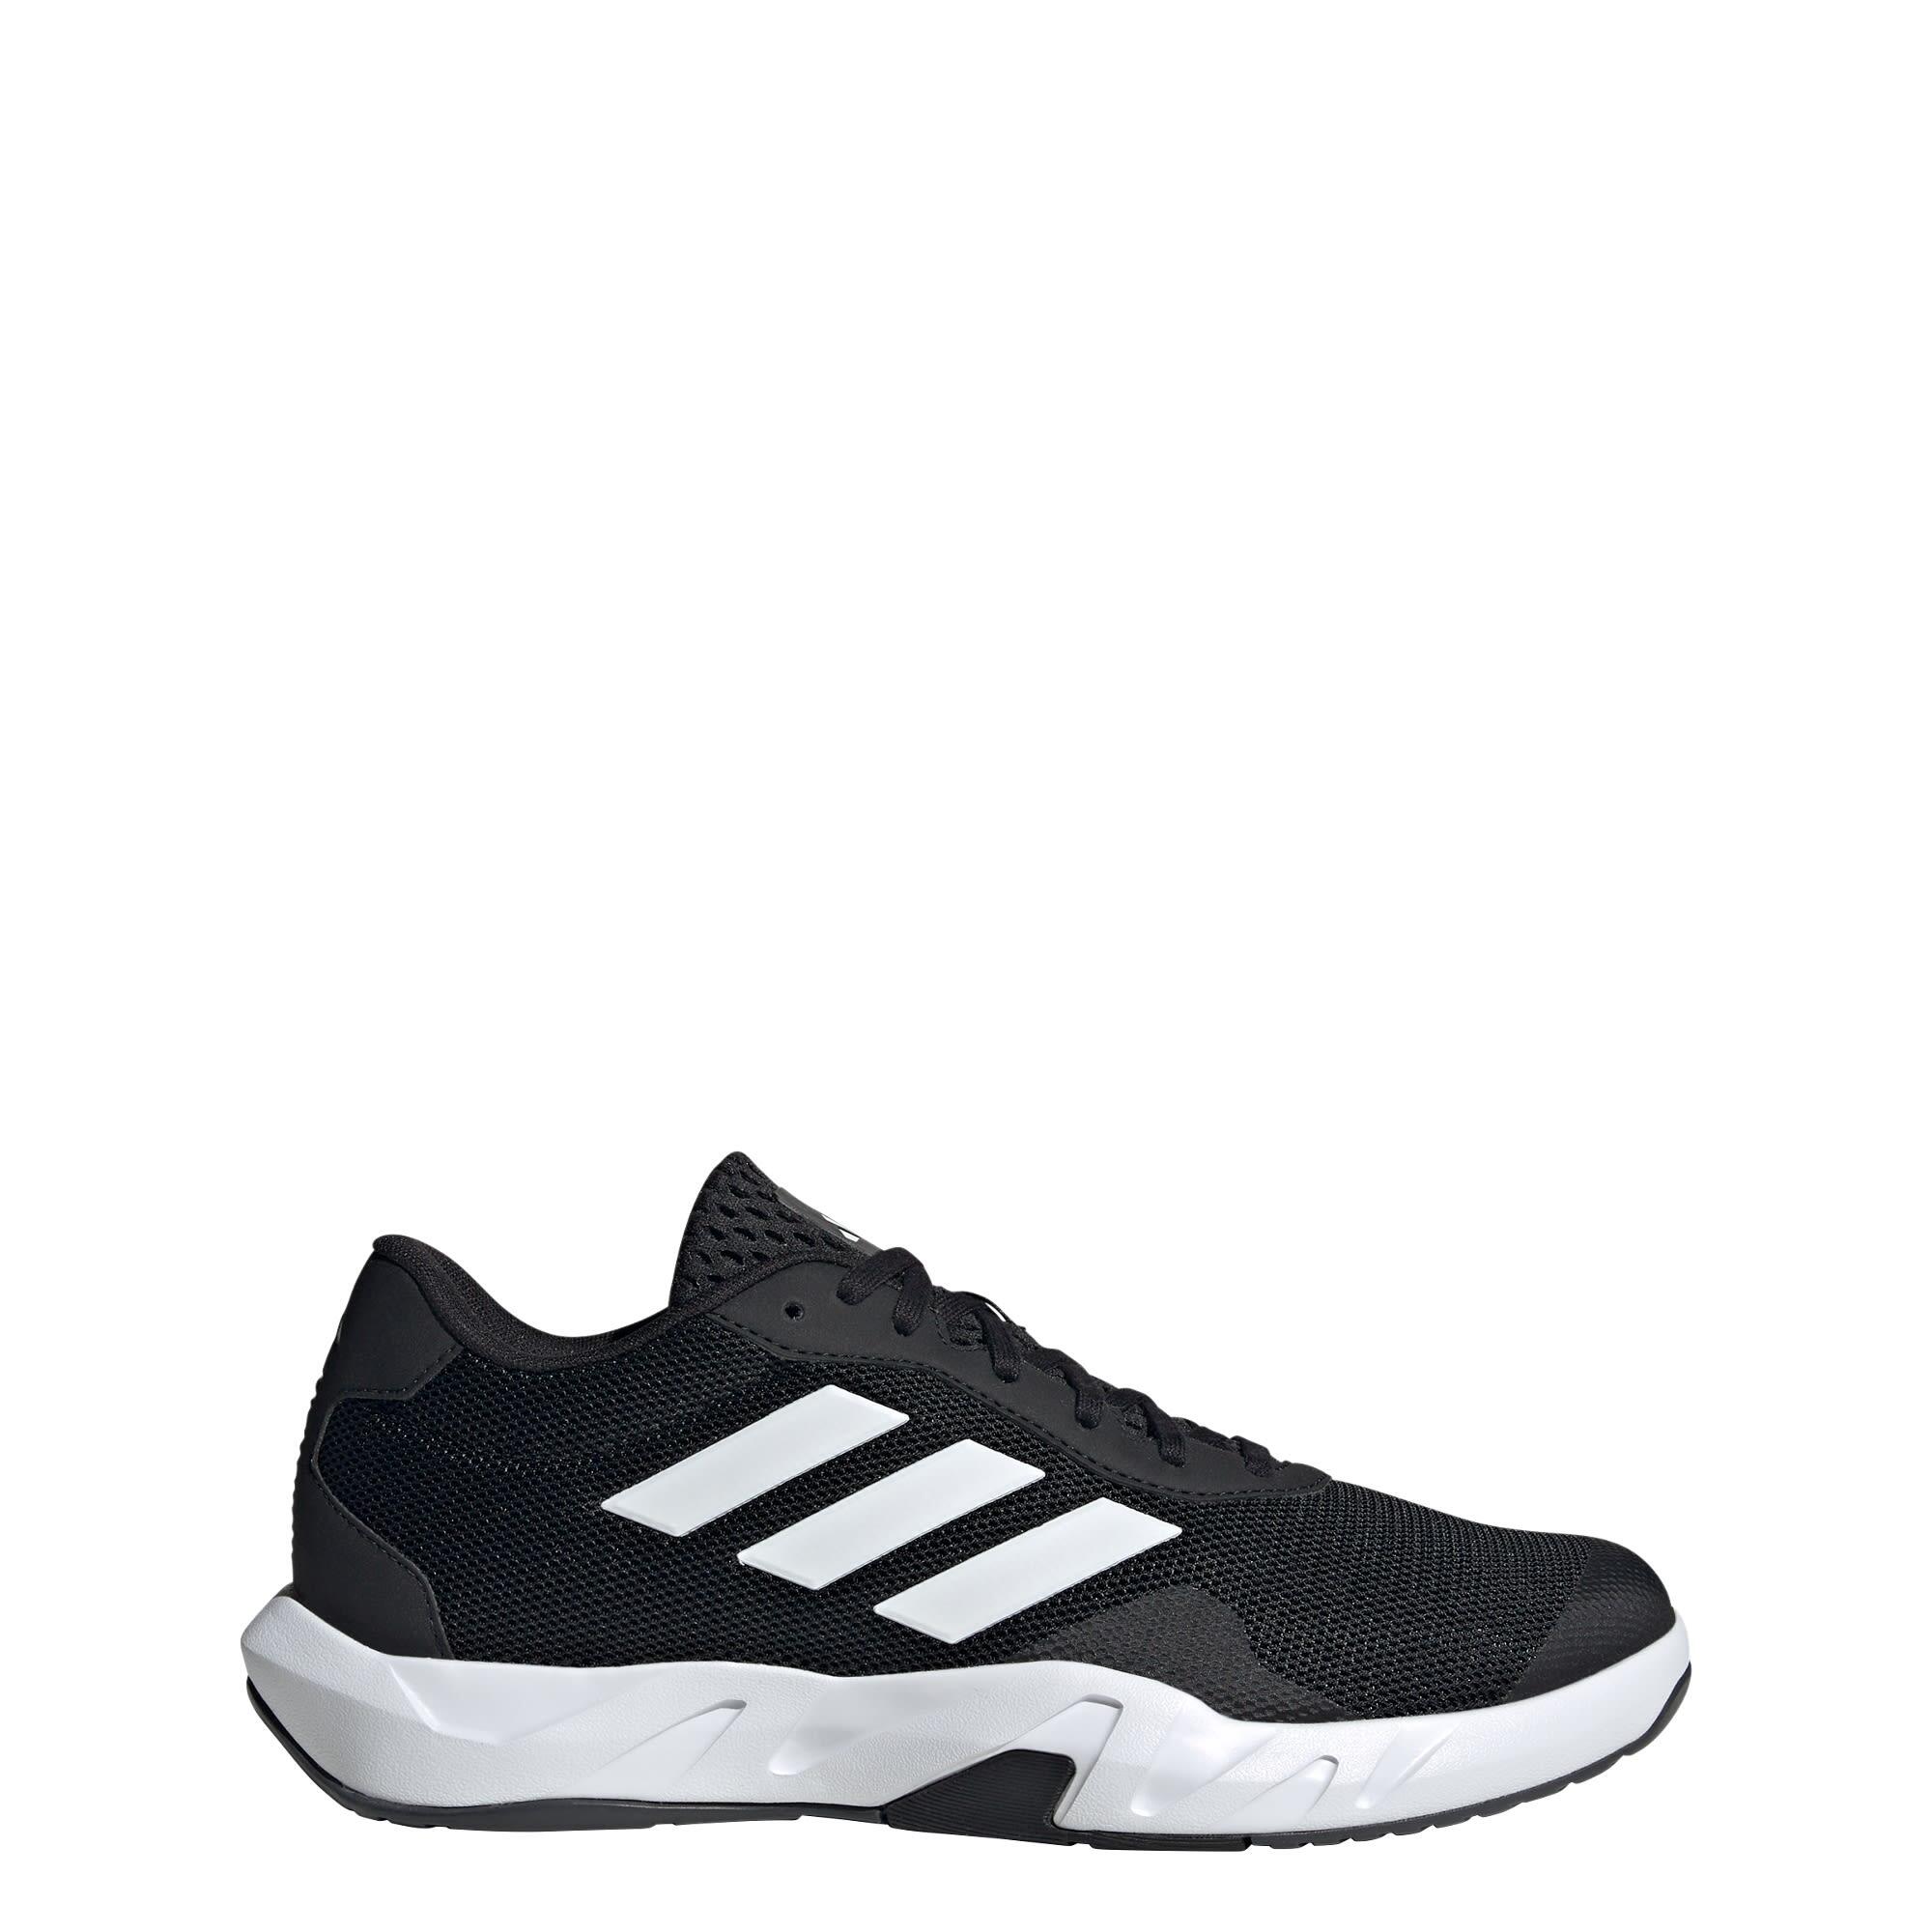 ADIDAS Amplimove Trainer Shoes